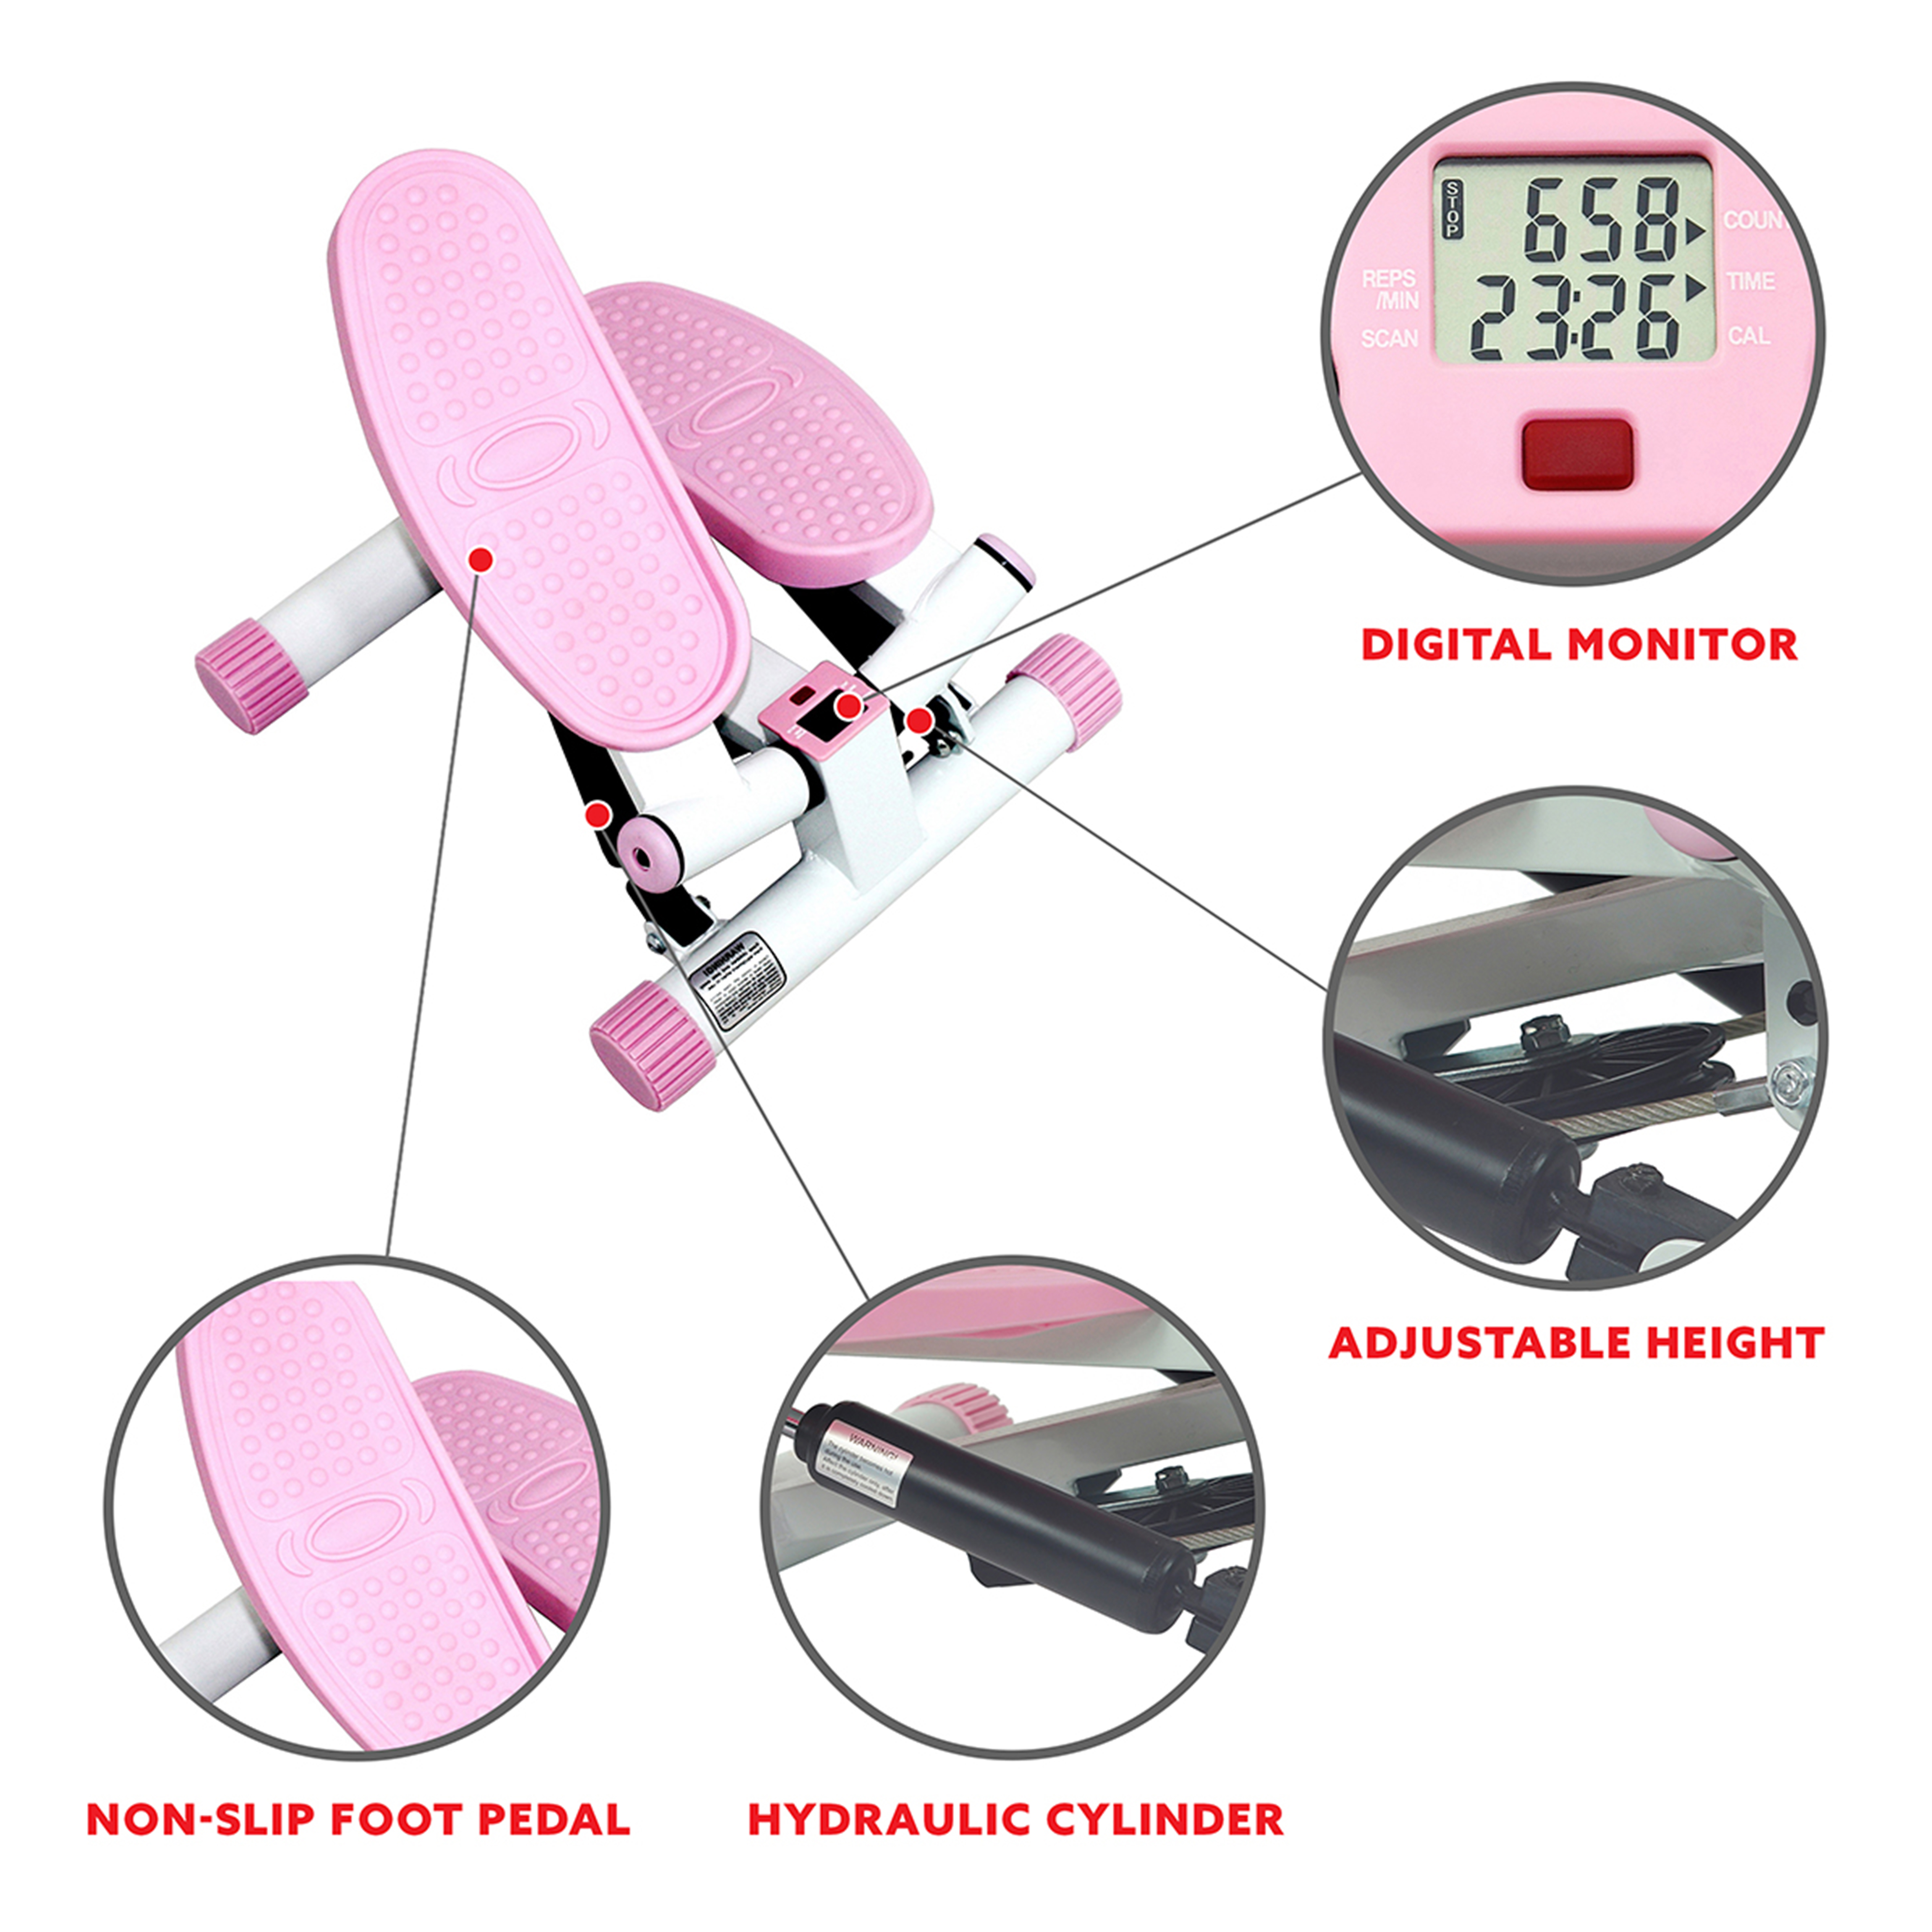 Sunny Health & Fitness Pink Adjustable Twist Stepper Machine w/ LCD Monitor - Mini Stair Stepper for at Home Exercise, P8000 - image 4 of 9